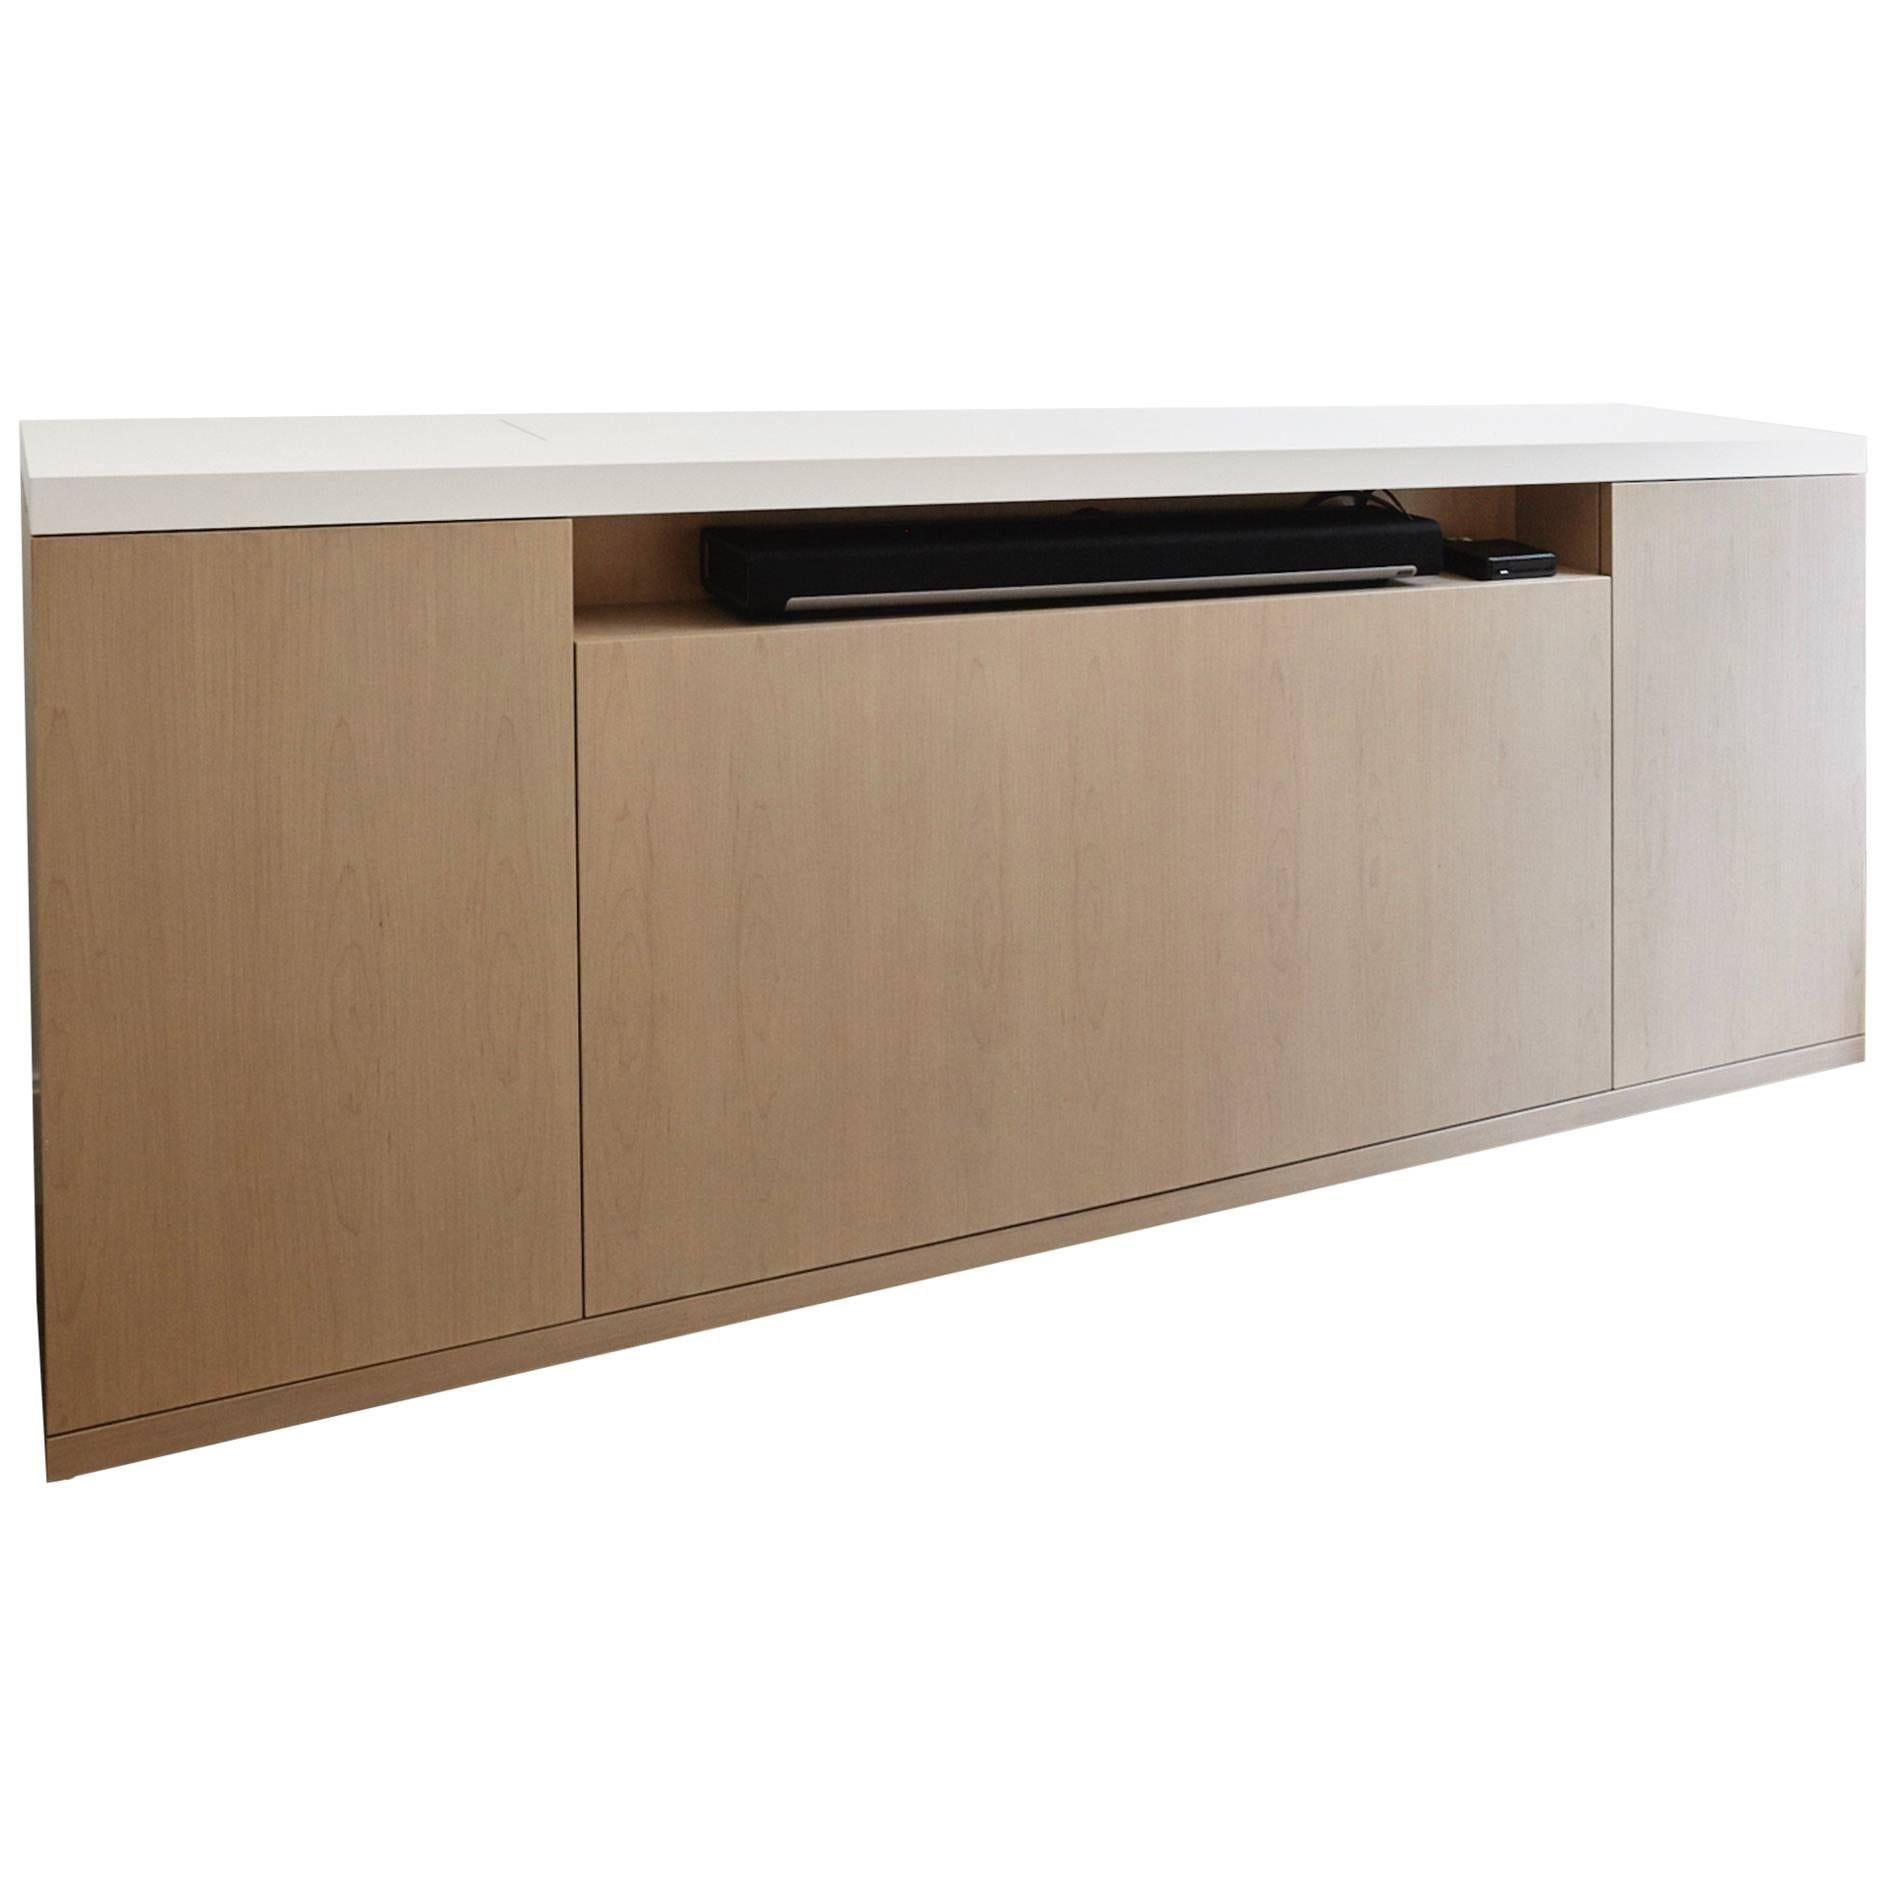 Verona Cabinet a Stylish Media Unit with Storage and Wireless TV Lift For Sale